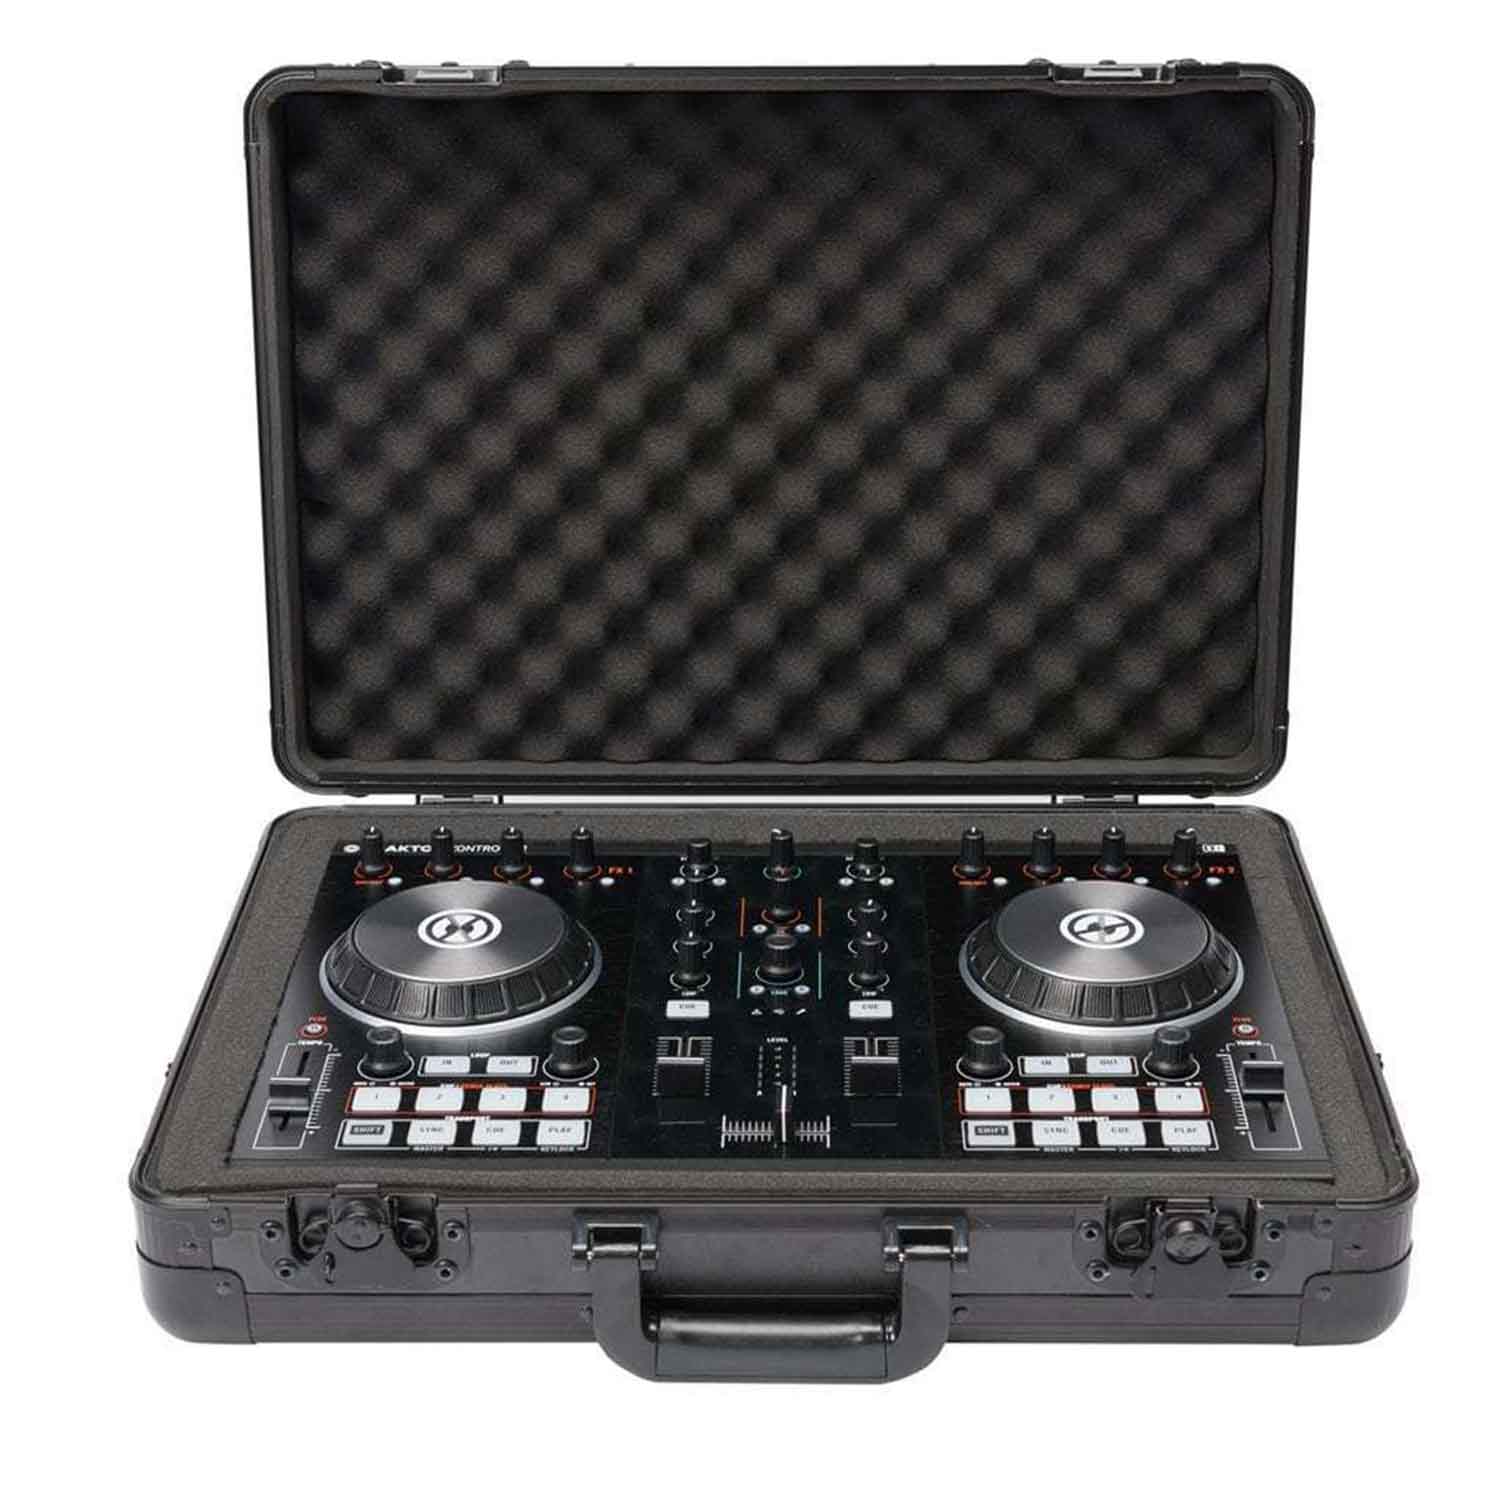 B-Stock: Magma MGA41100 Carry-Lite Case L For DJ Controllers - Hollywood DJ